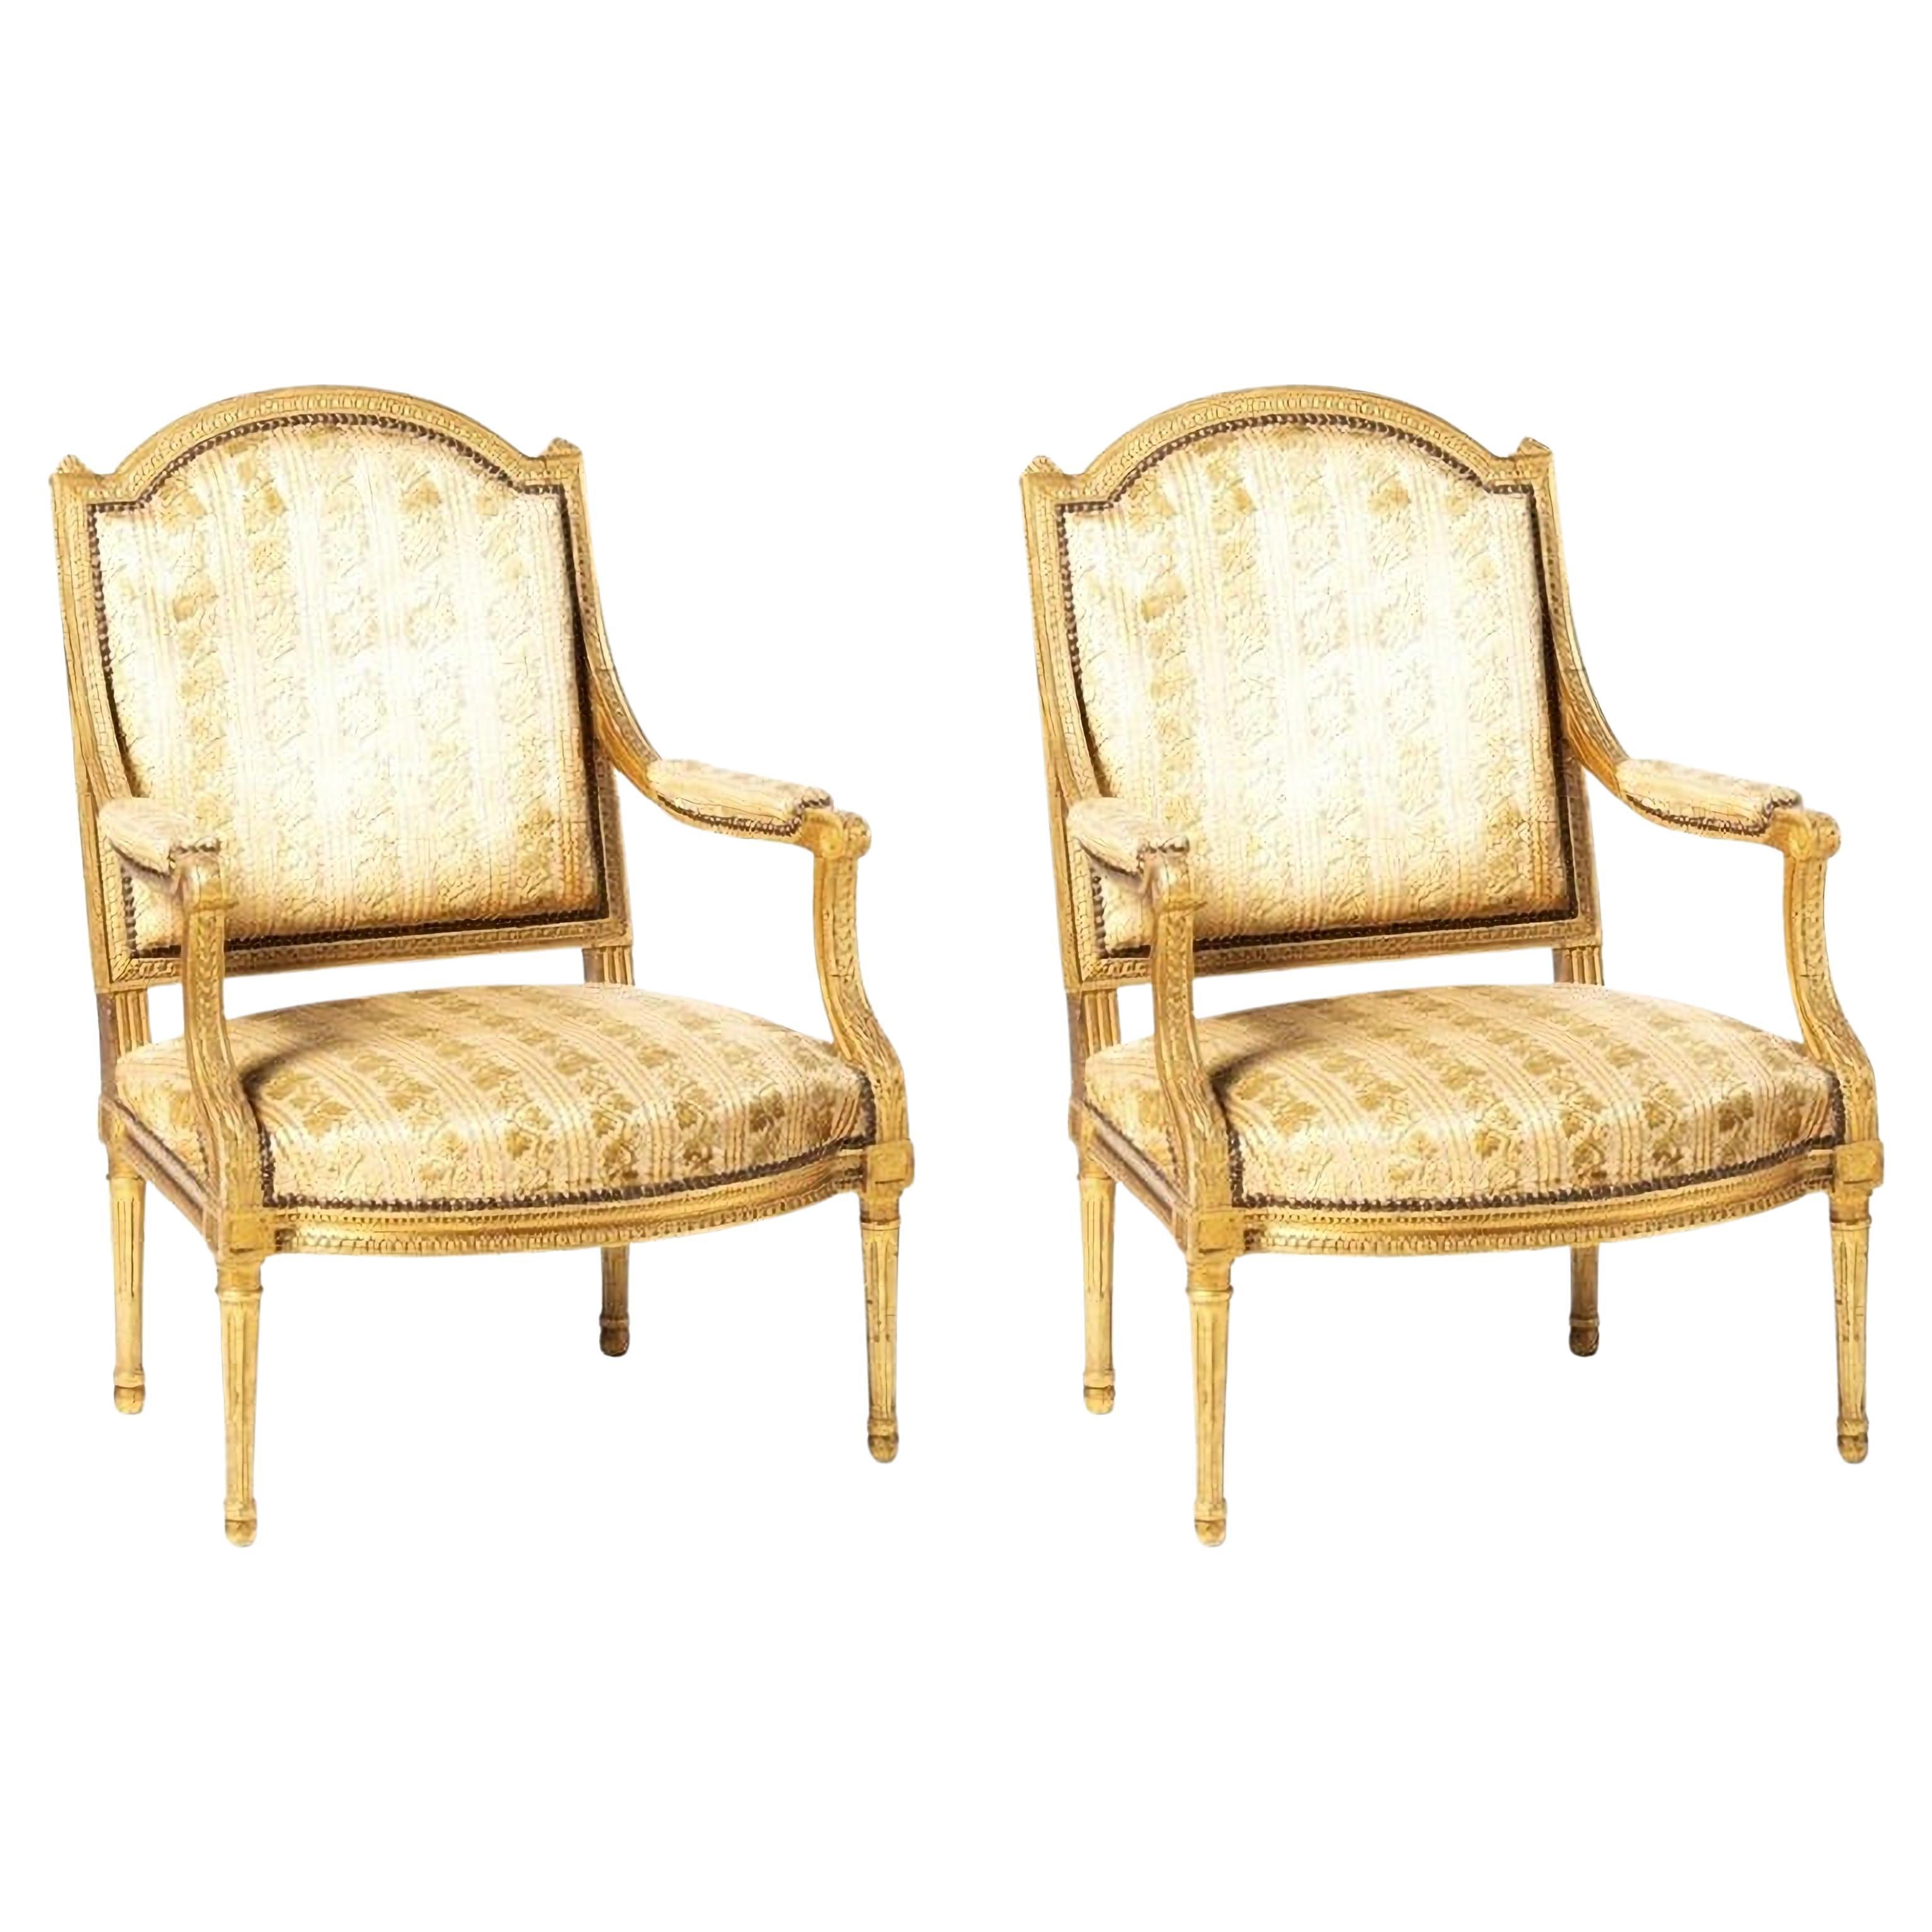 Pair of French Louis XVI Style Fauteuils, 19th Century For Sale